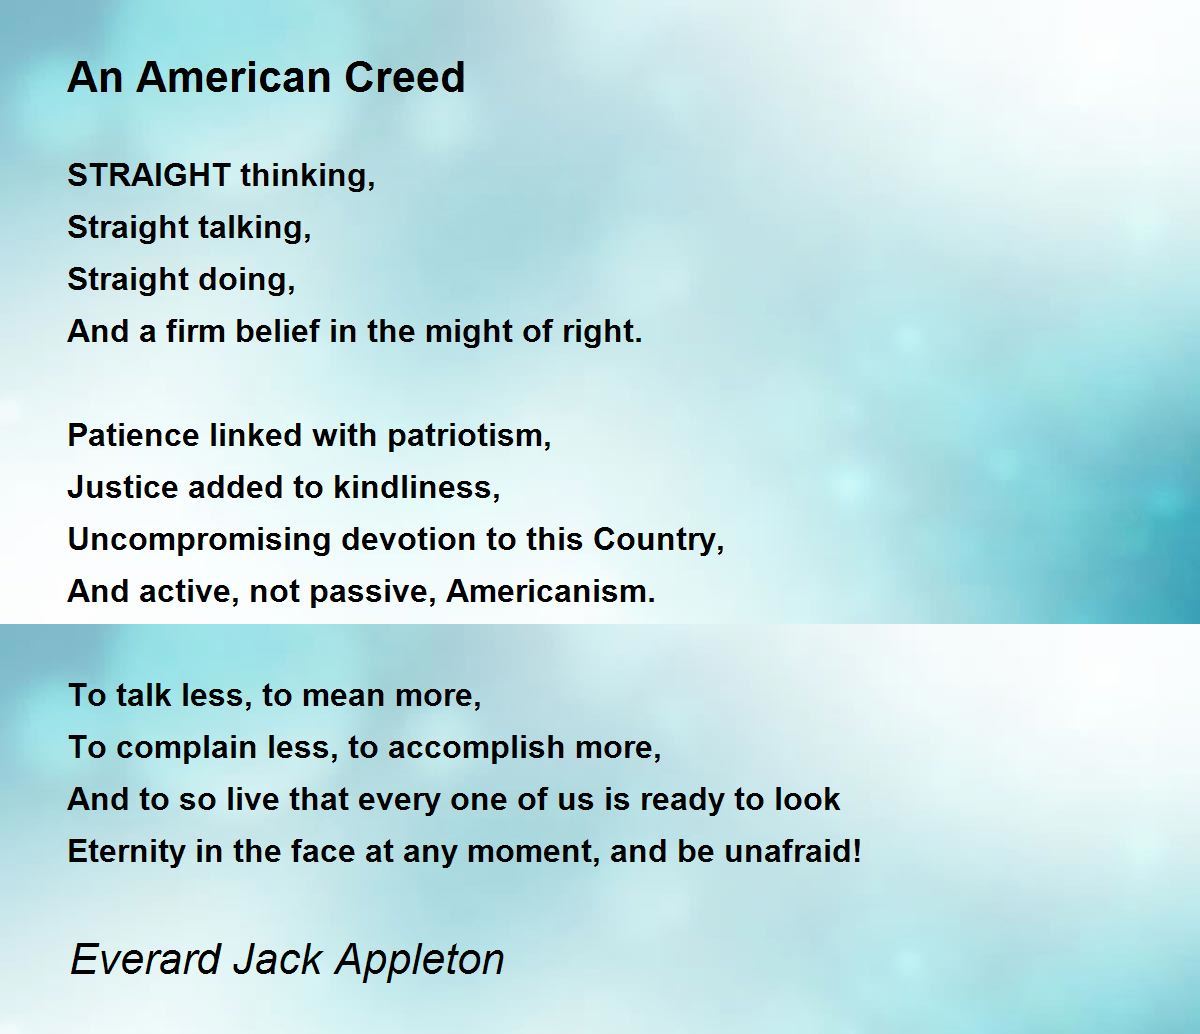 The American's Creed